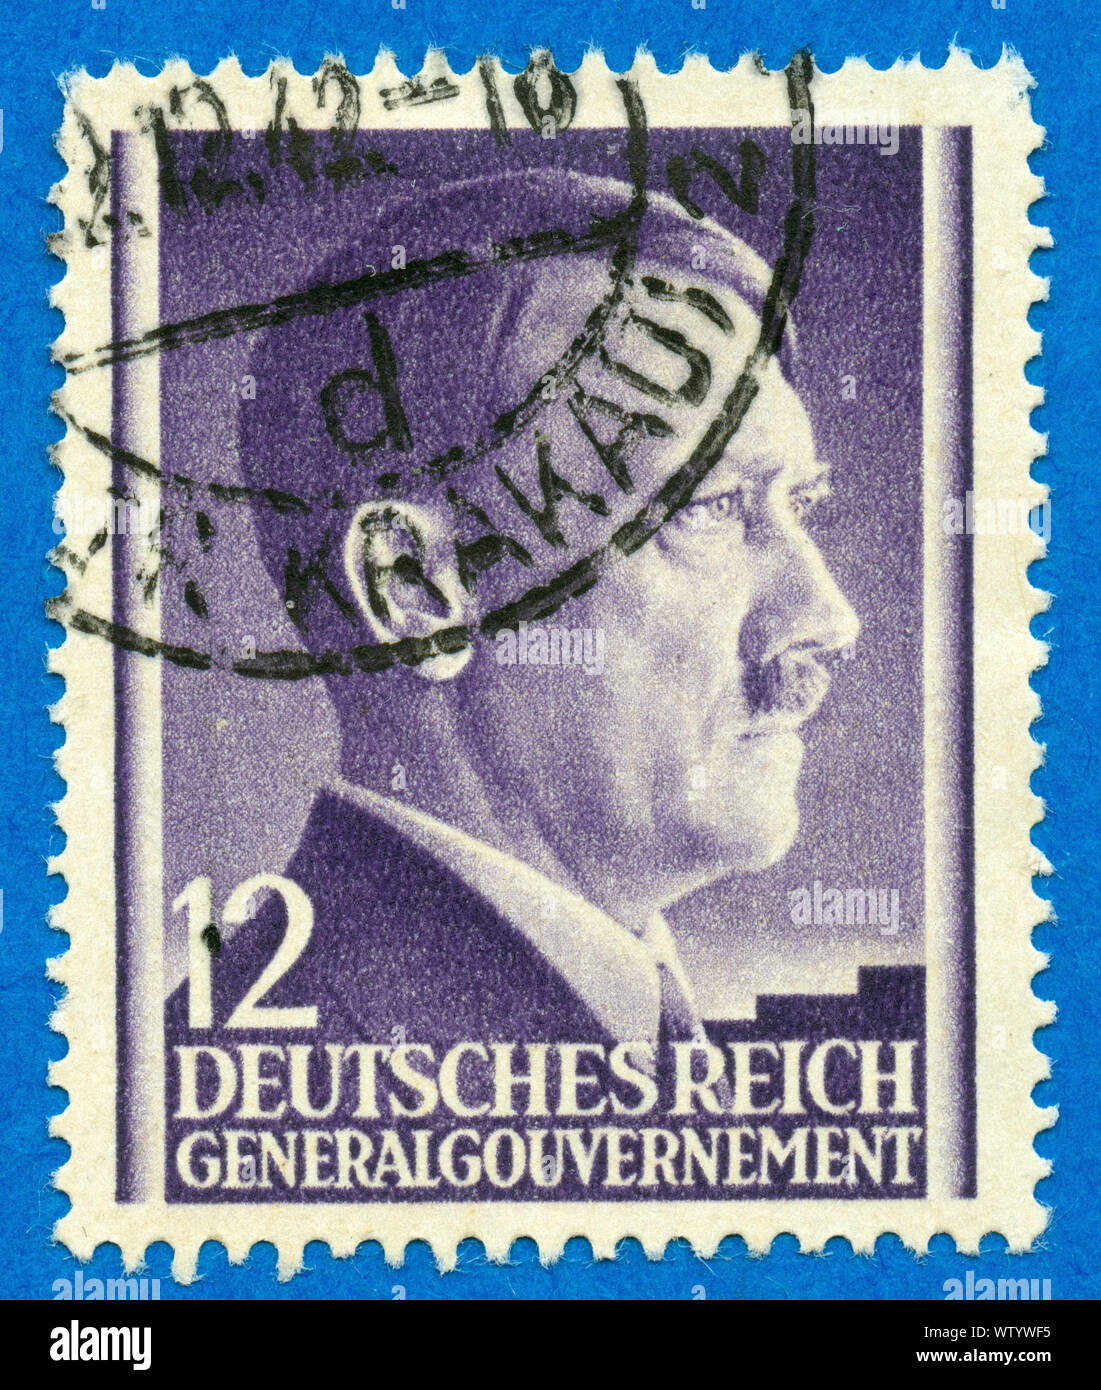 GERMANY - CIRCA 1942: An GERMANY Used Postage Stamp showing Portrait of Adolf Hitler, circa 1942. Stock Photo